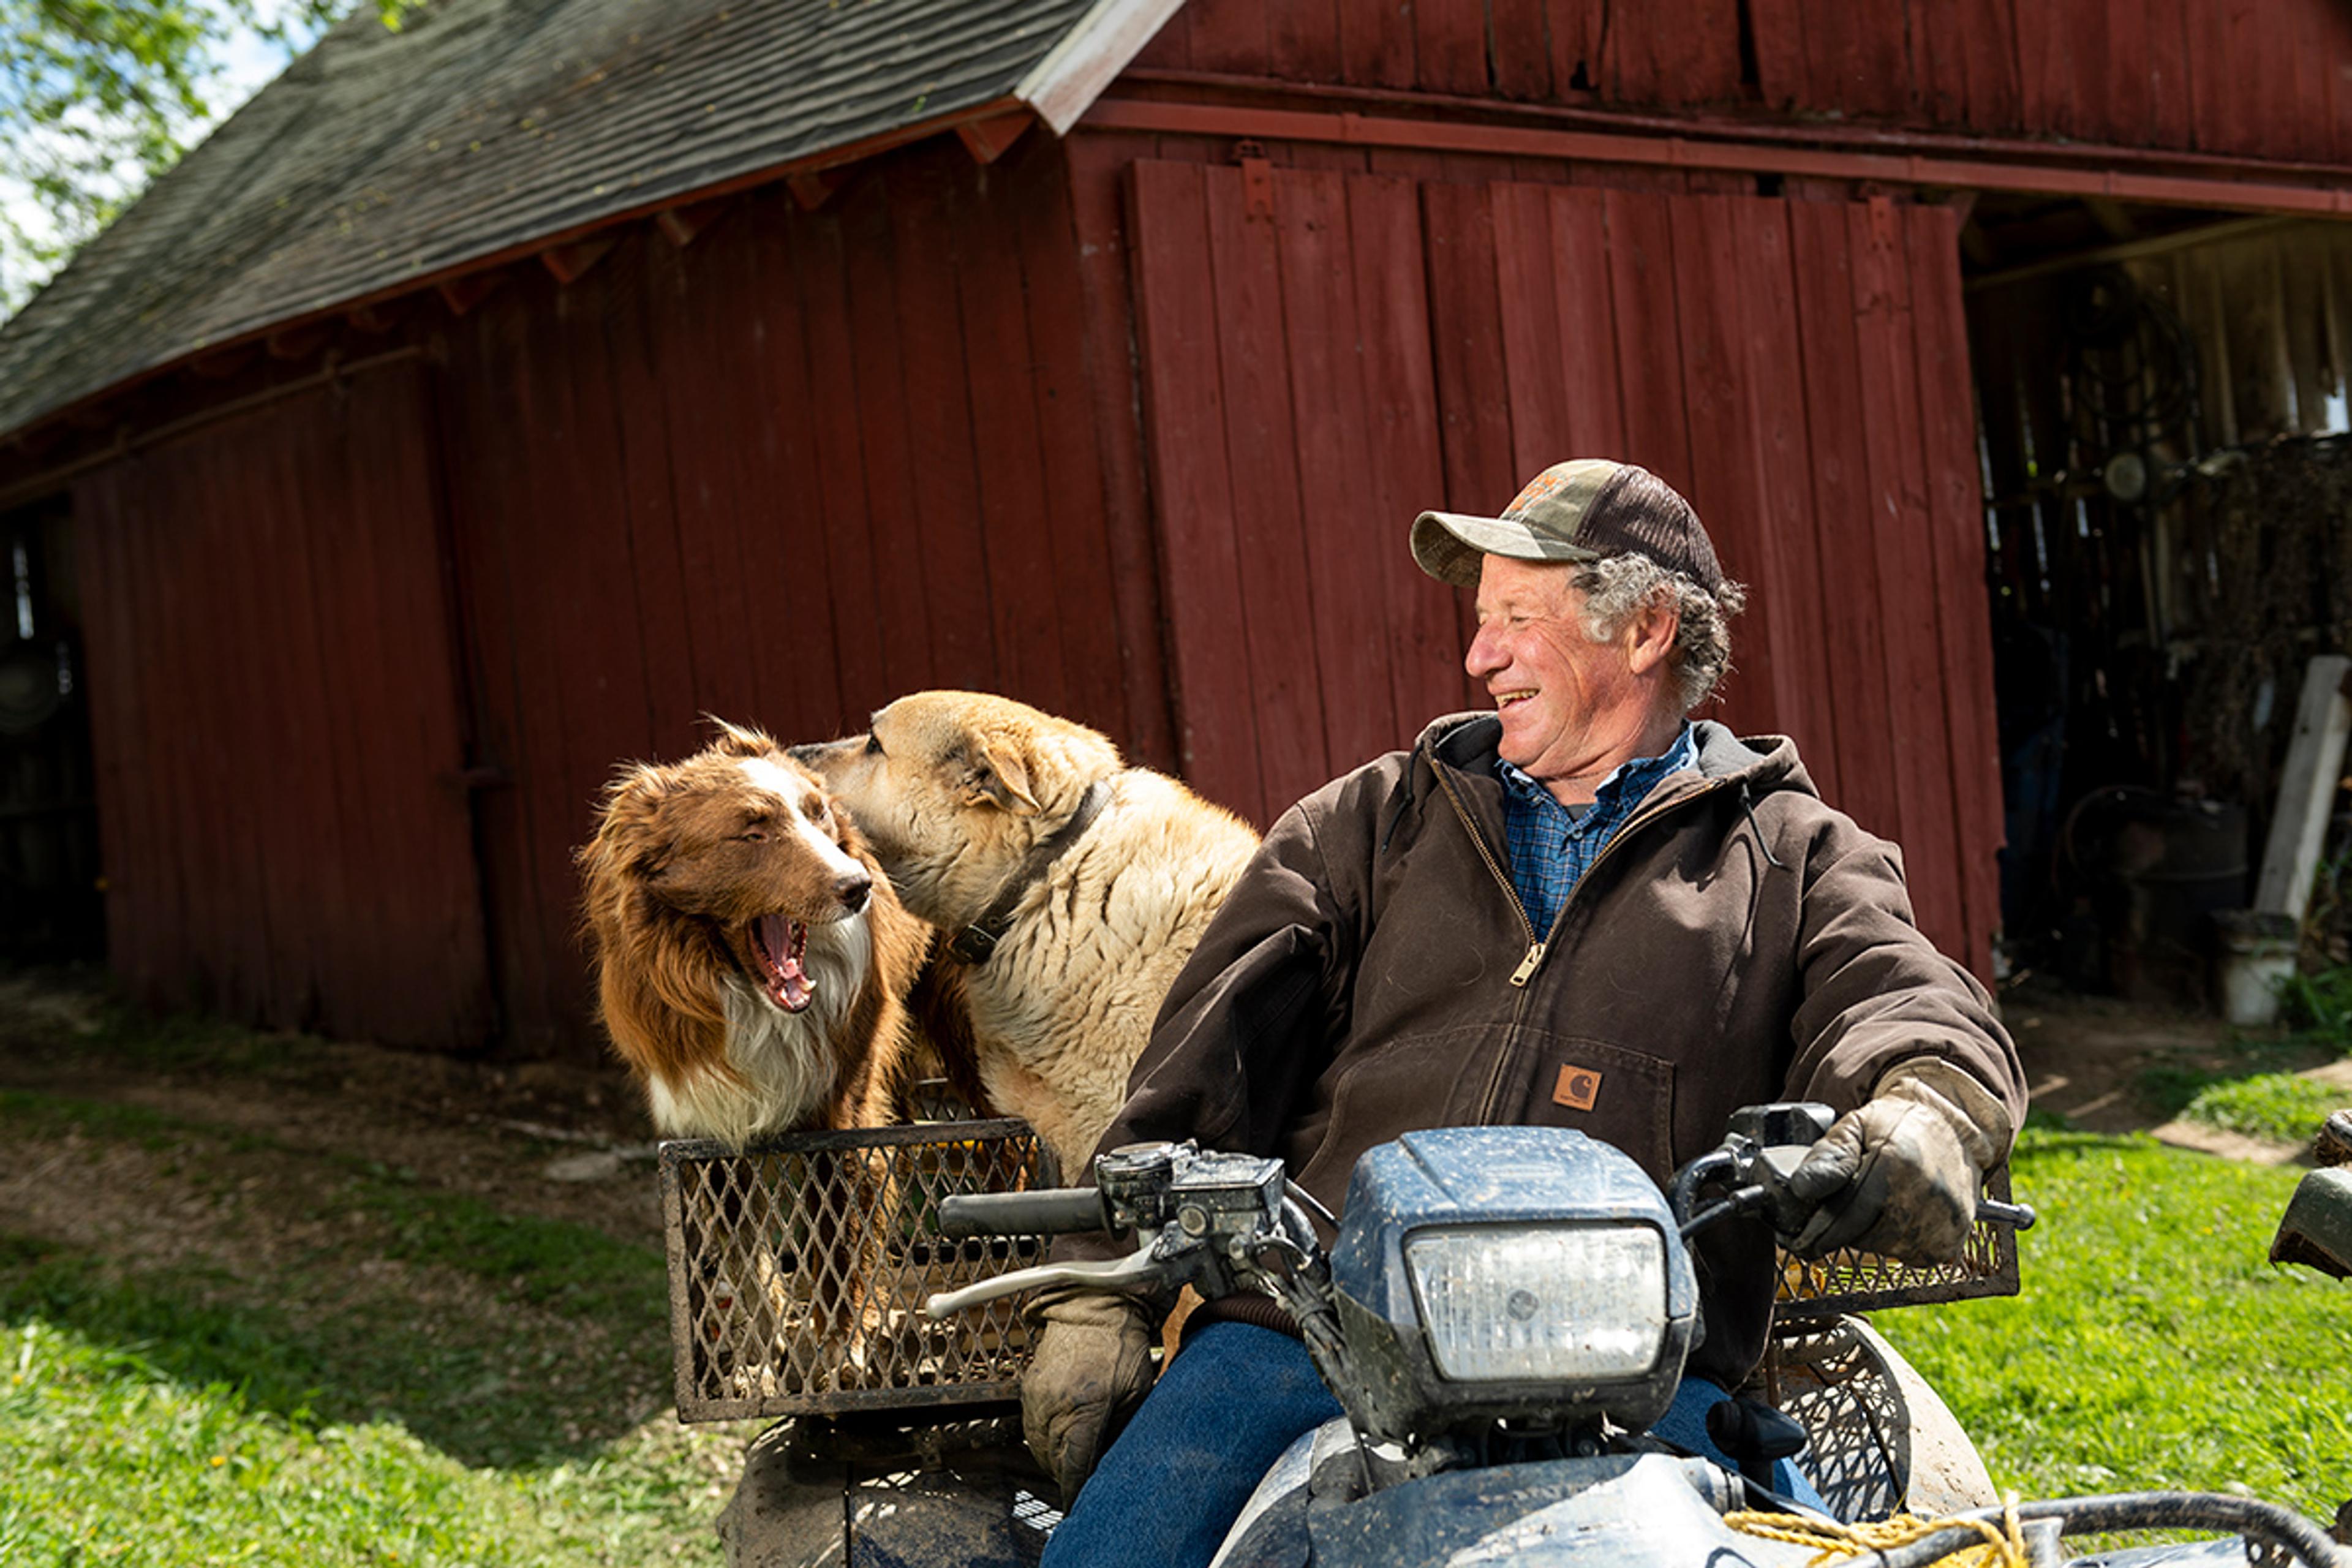 A middle-aged man sits on a four-wheeler and laughs at his two dogs sitting on the back.